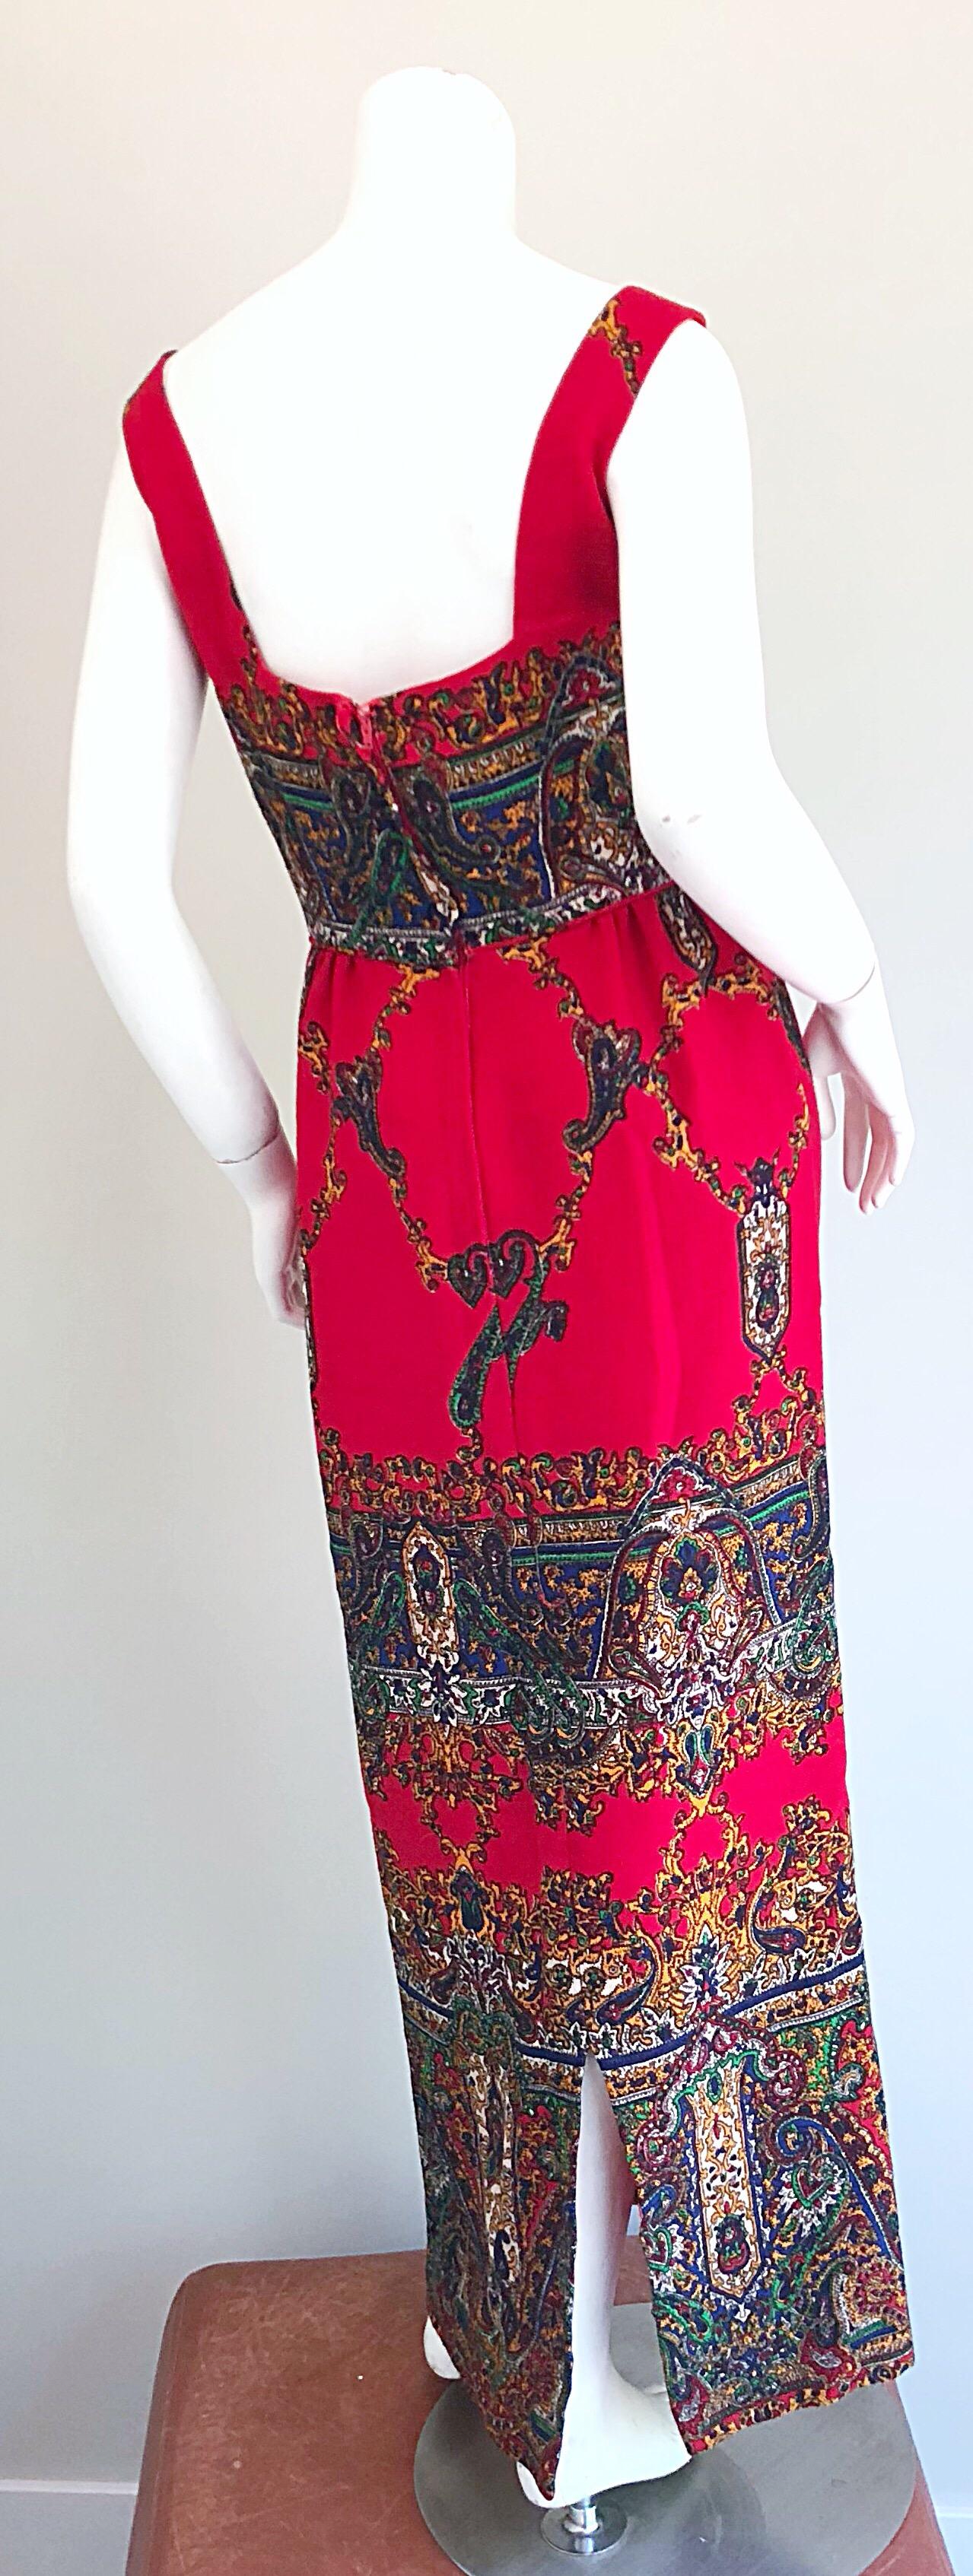 Fantastic Early 1970s Boho Chic Paisley Print Vintage Red 70s Maxi Dress For Sale 4